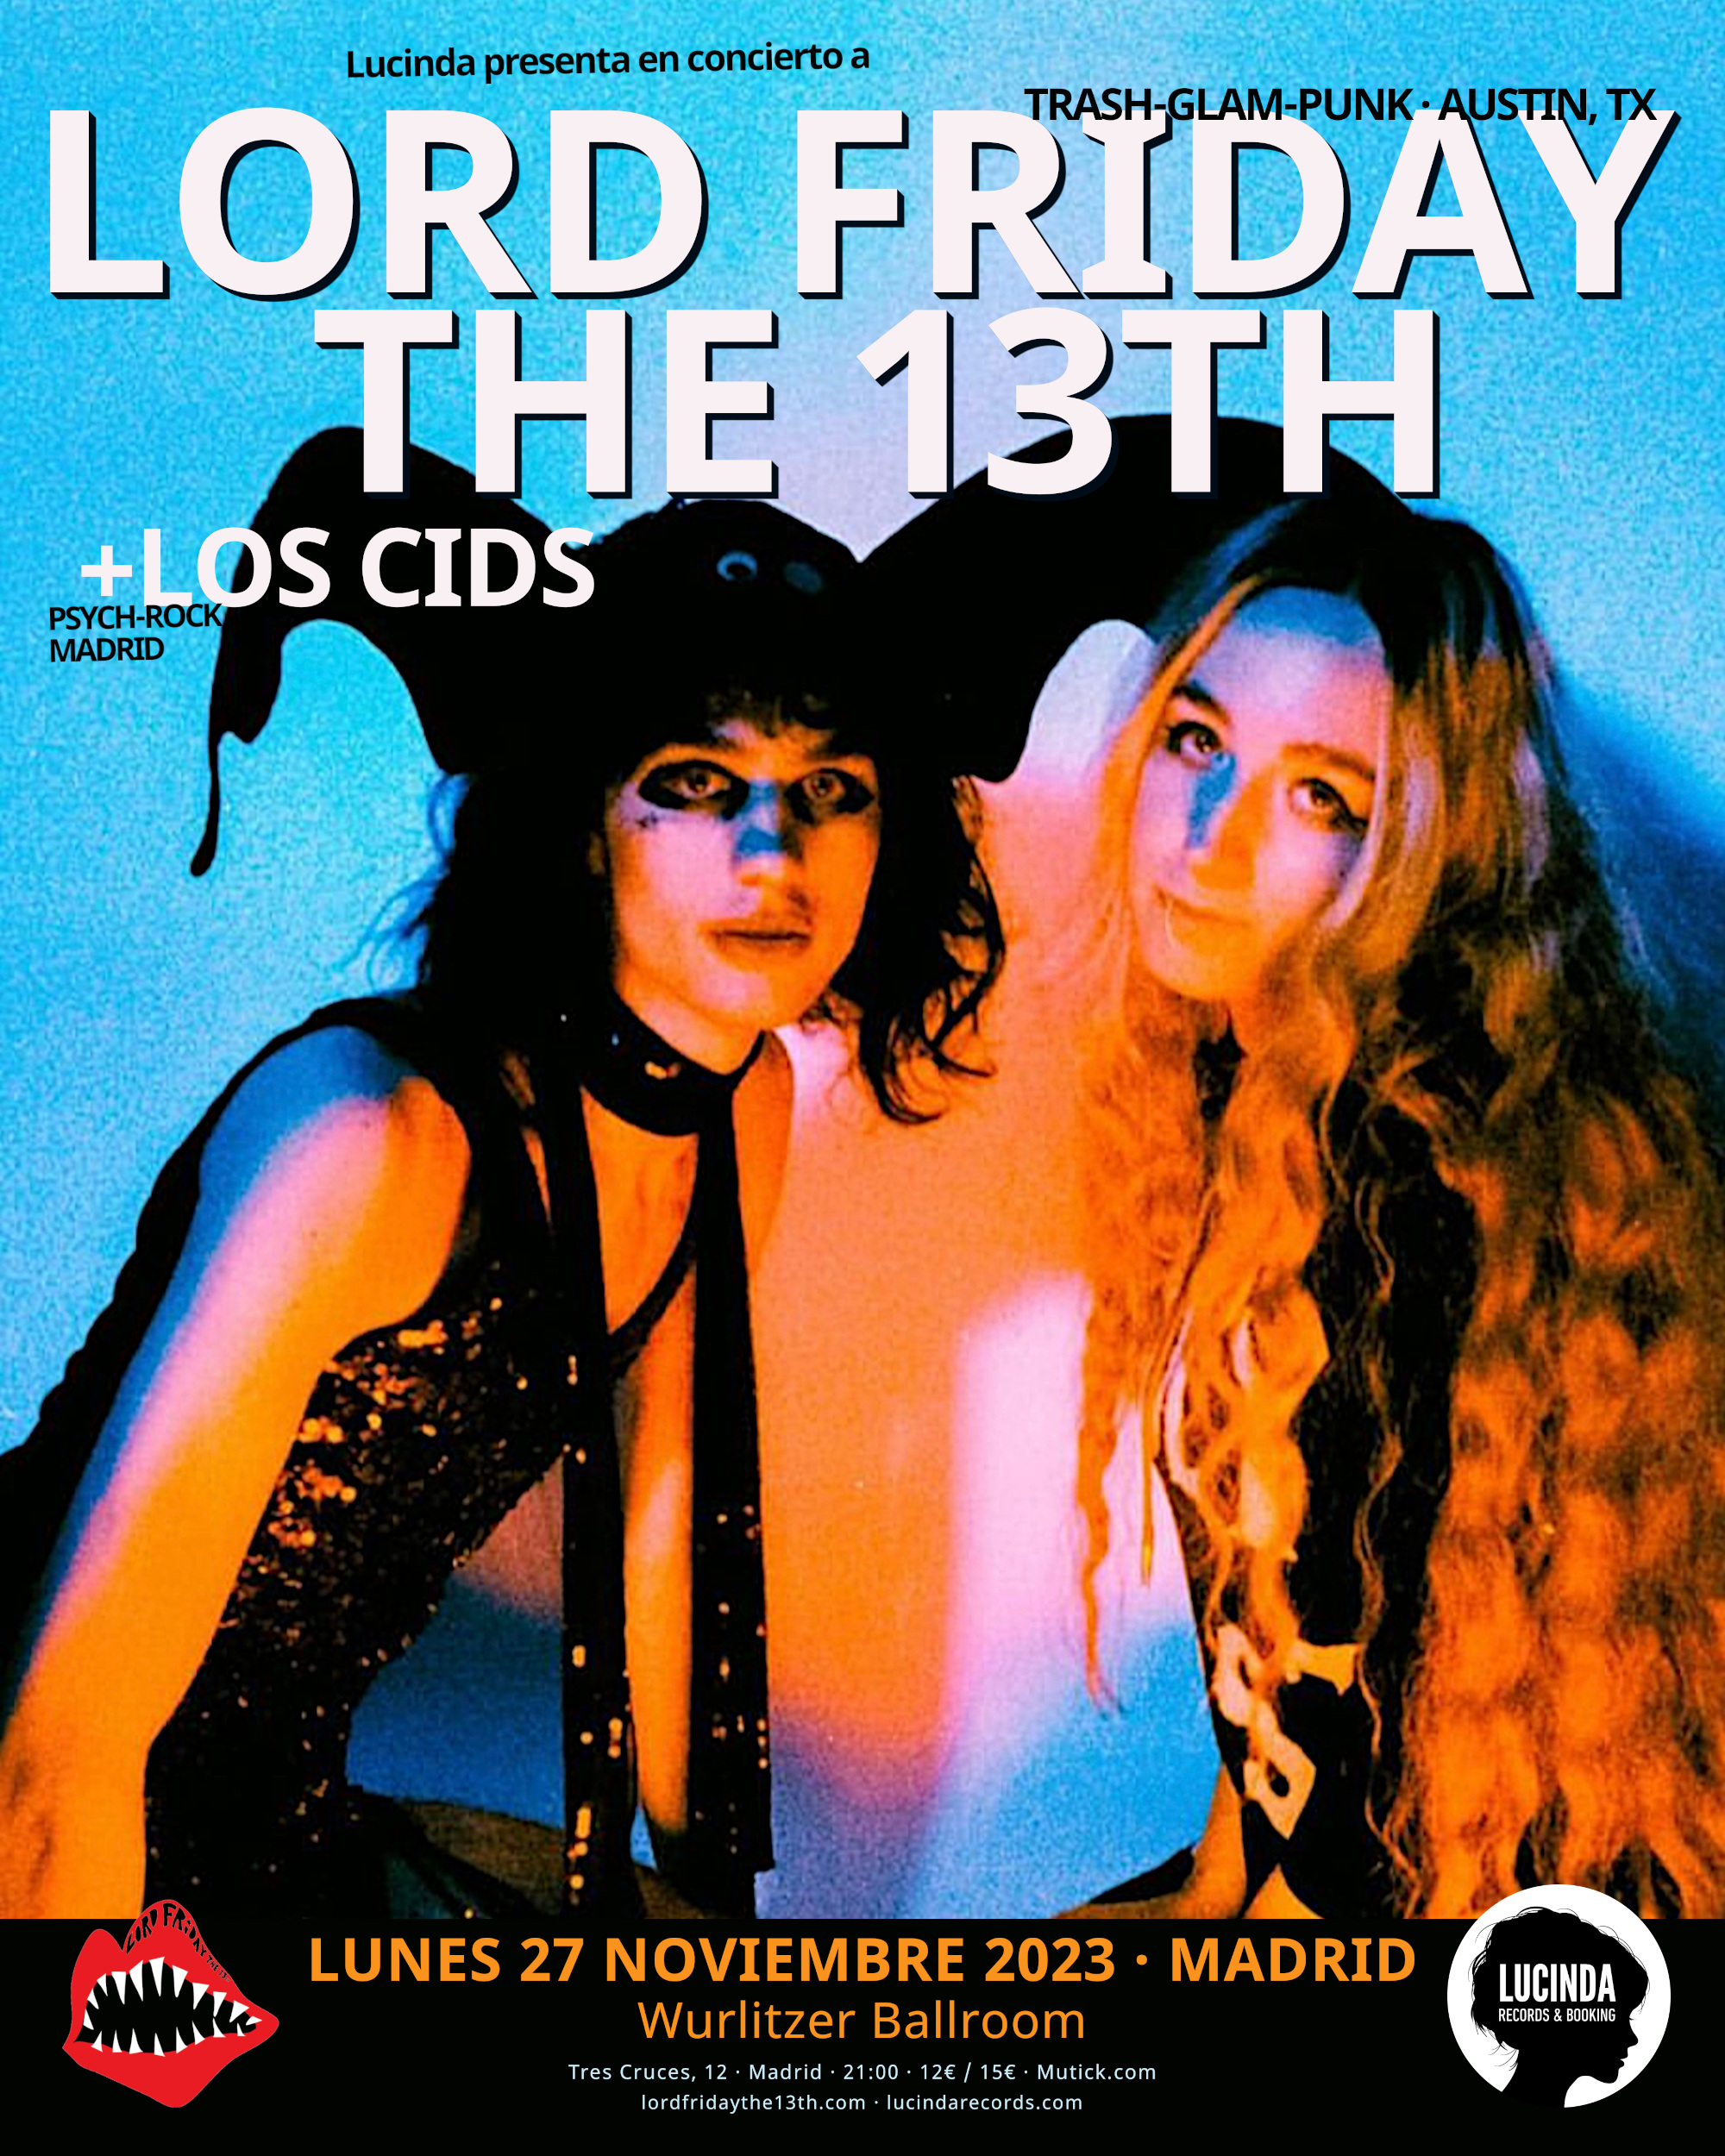 LORD FRIDAY the 13Th (USA) + Los Cids en Madrid - Mutick